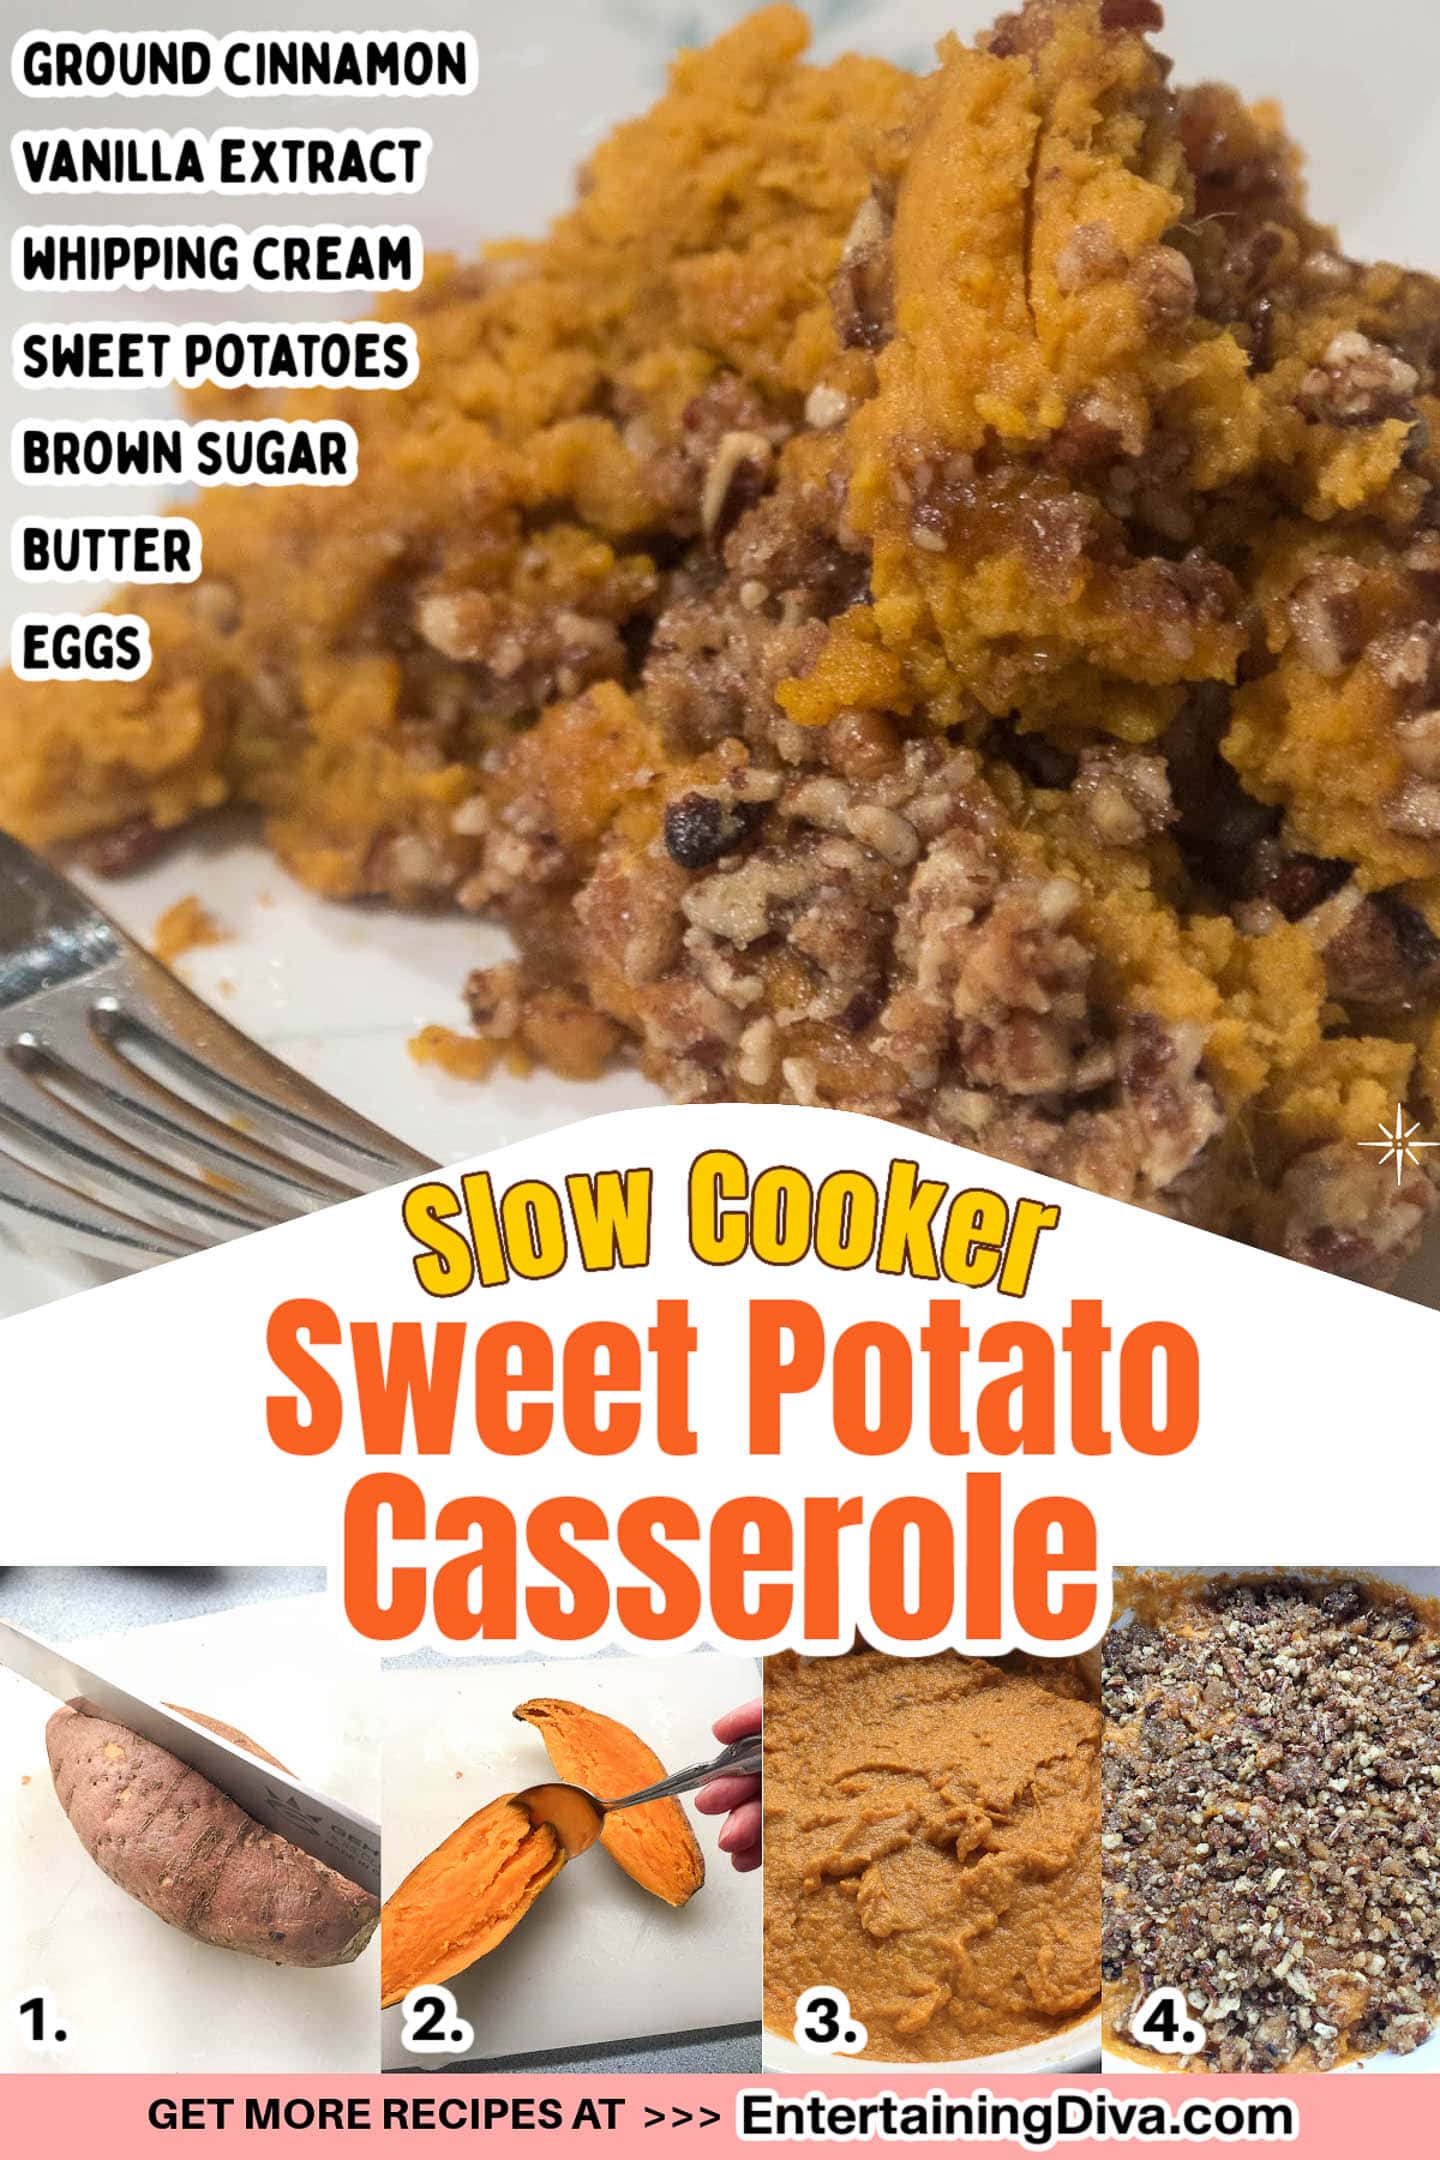 slow cooker sweet potato casserole with list of ingredients and steps to make it